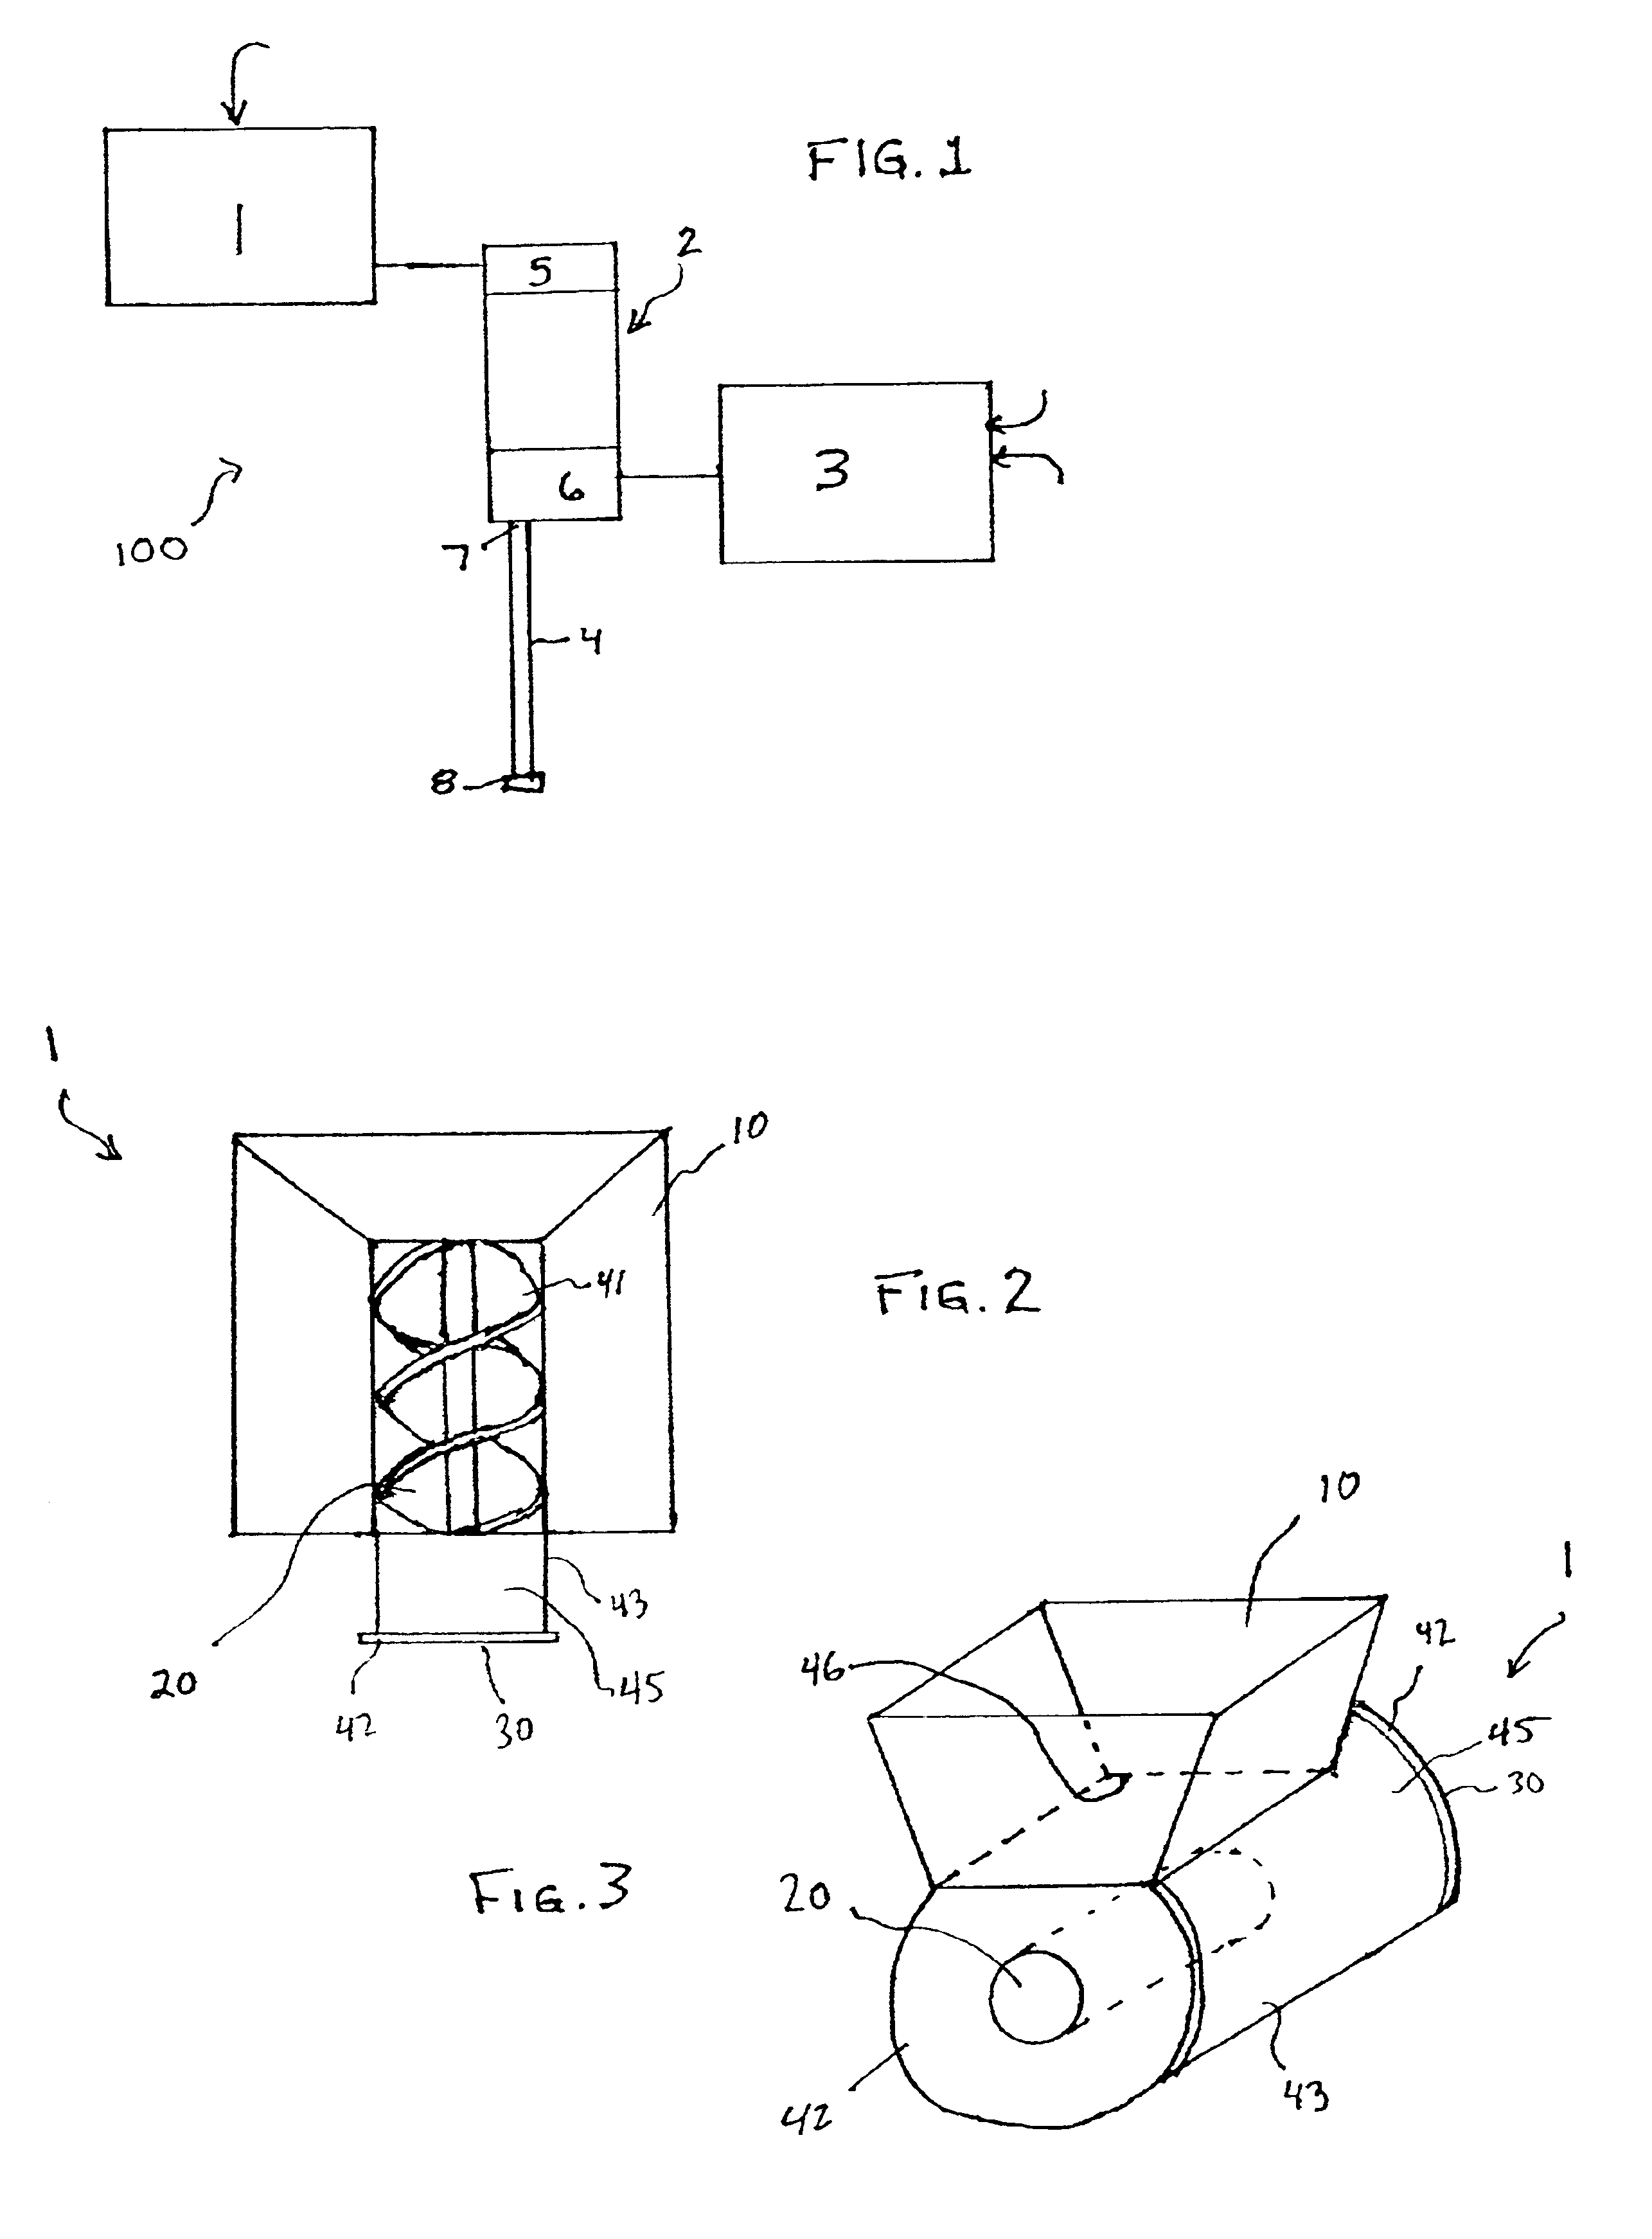 Method for making tires filled with flatproofing material